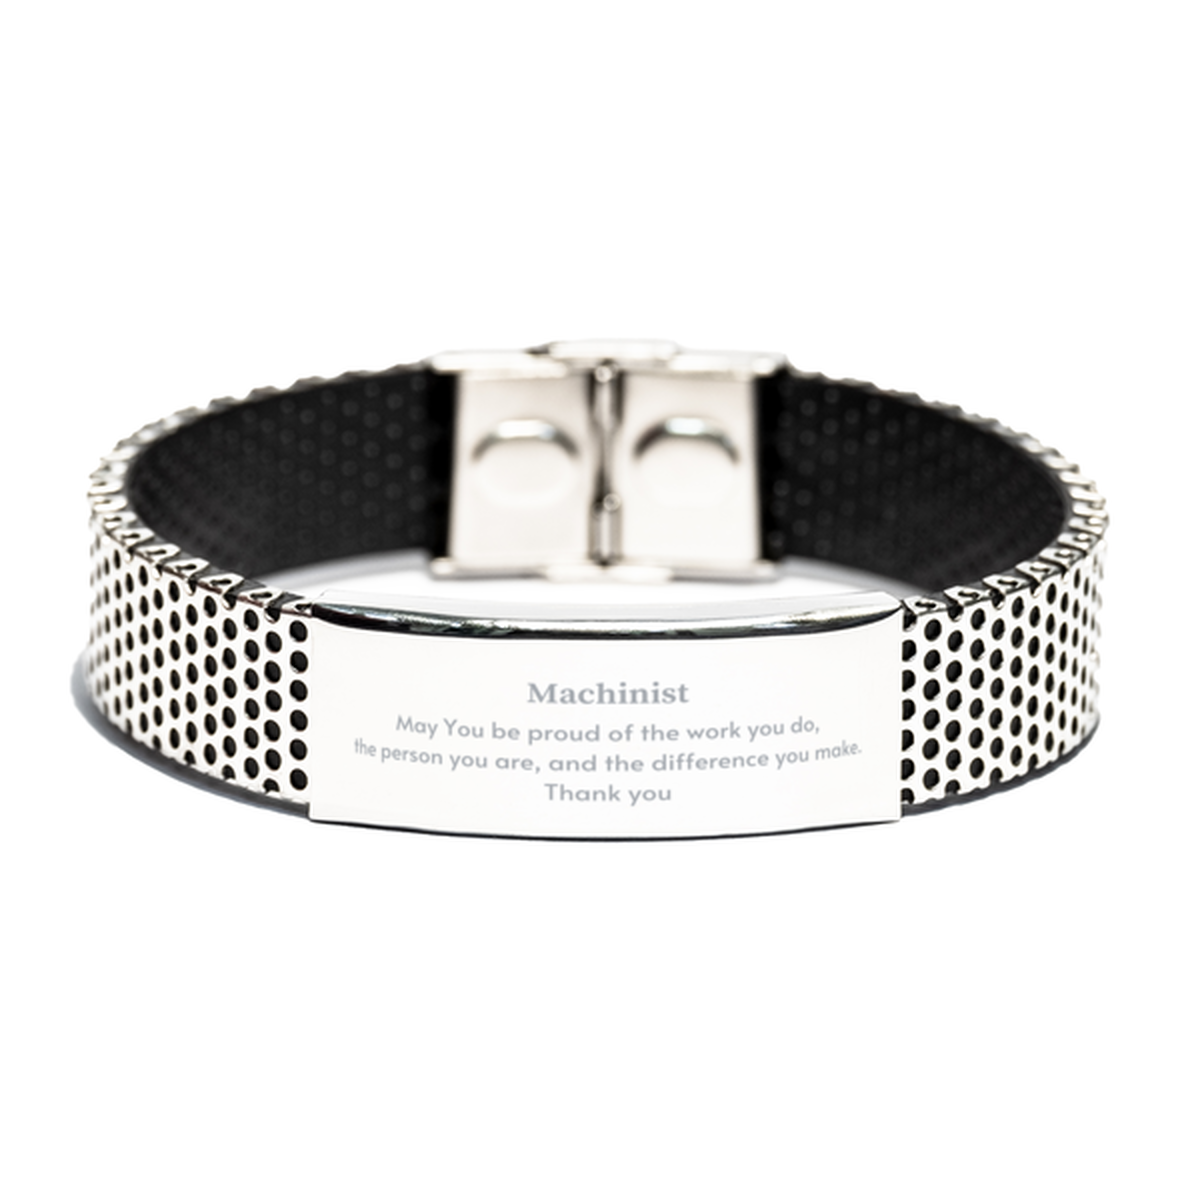 Heartwarming Stainless Steel Bracelet Retirement Coworkers Gifts for Machinist, Machinist May You be proud of the work you do, the person you are Gifts for Boss Men Women Friends